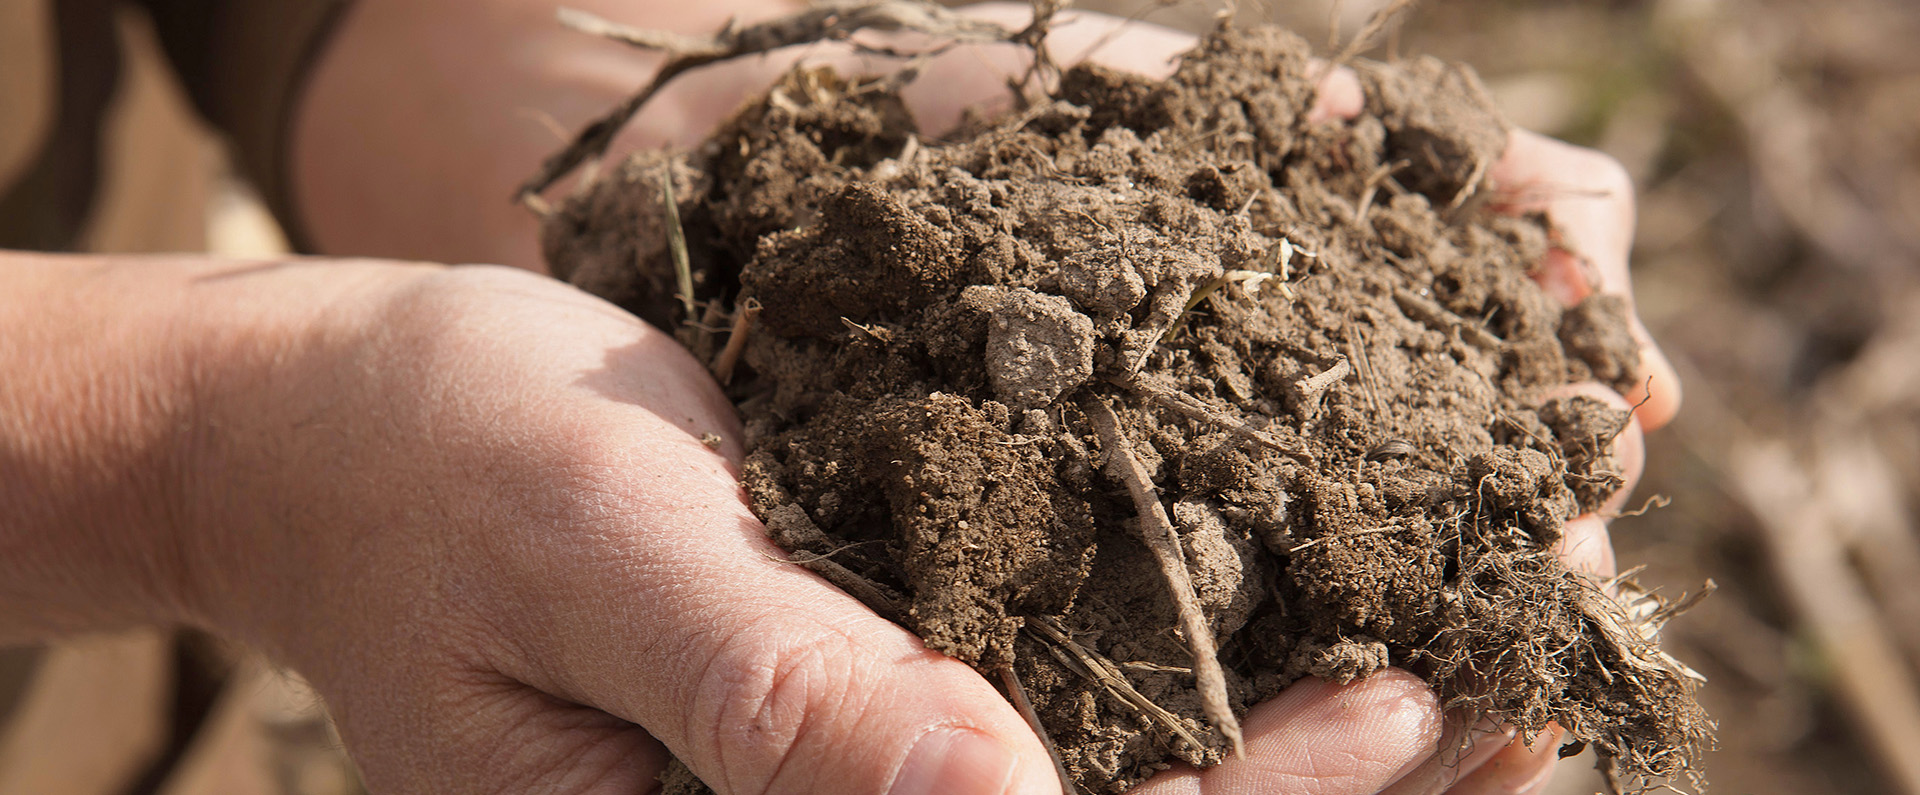 Two hands holding a mound of soil 